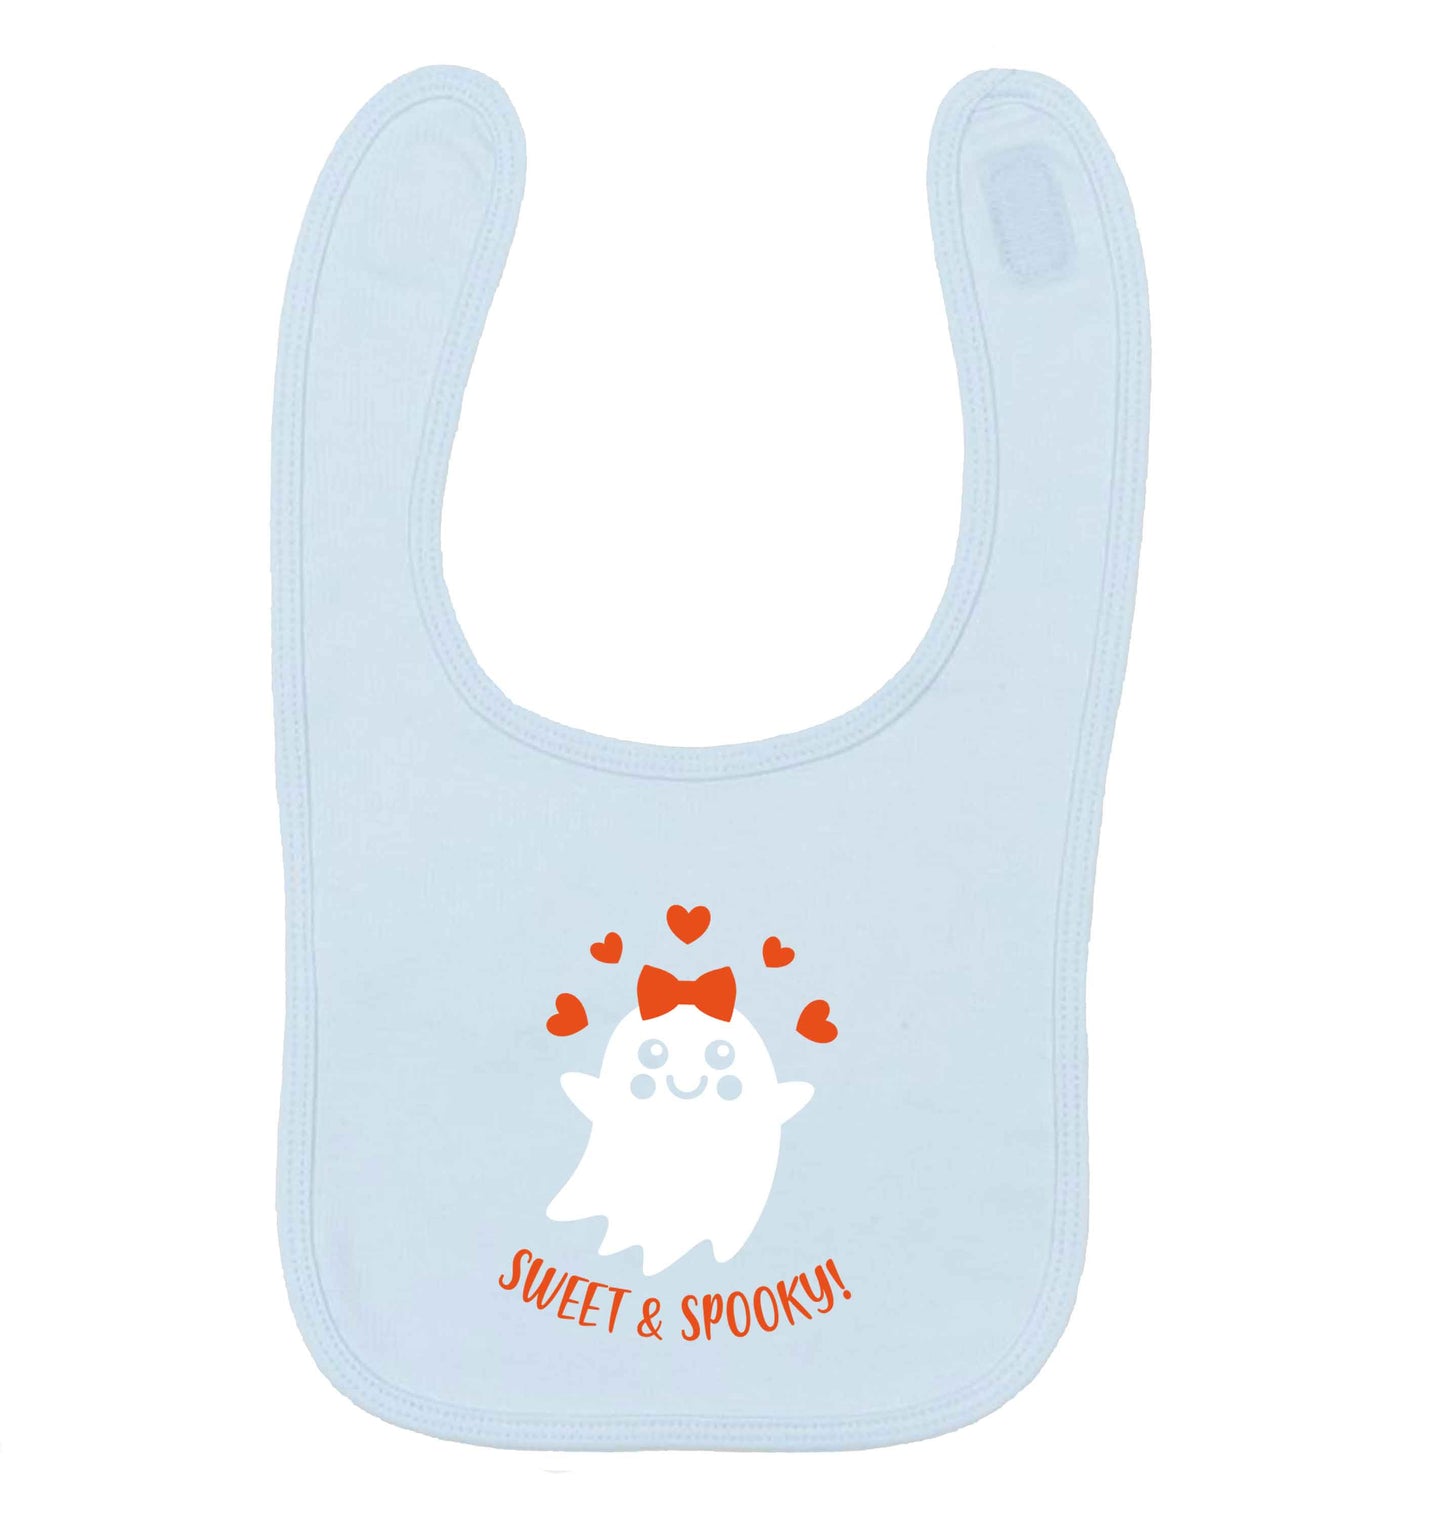 Sweet and spooky pale blue baby bib